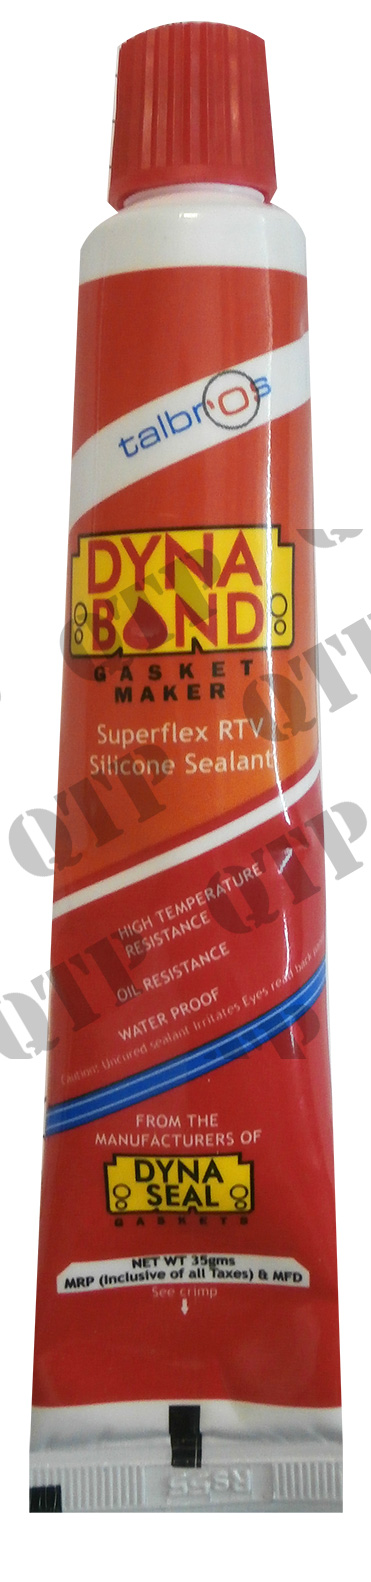 Gasket Maker Silicone High Temperature 35g